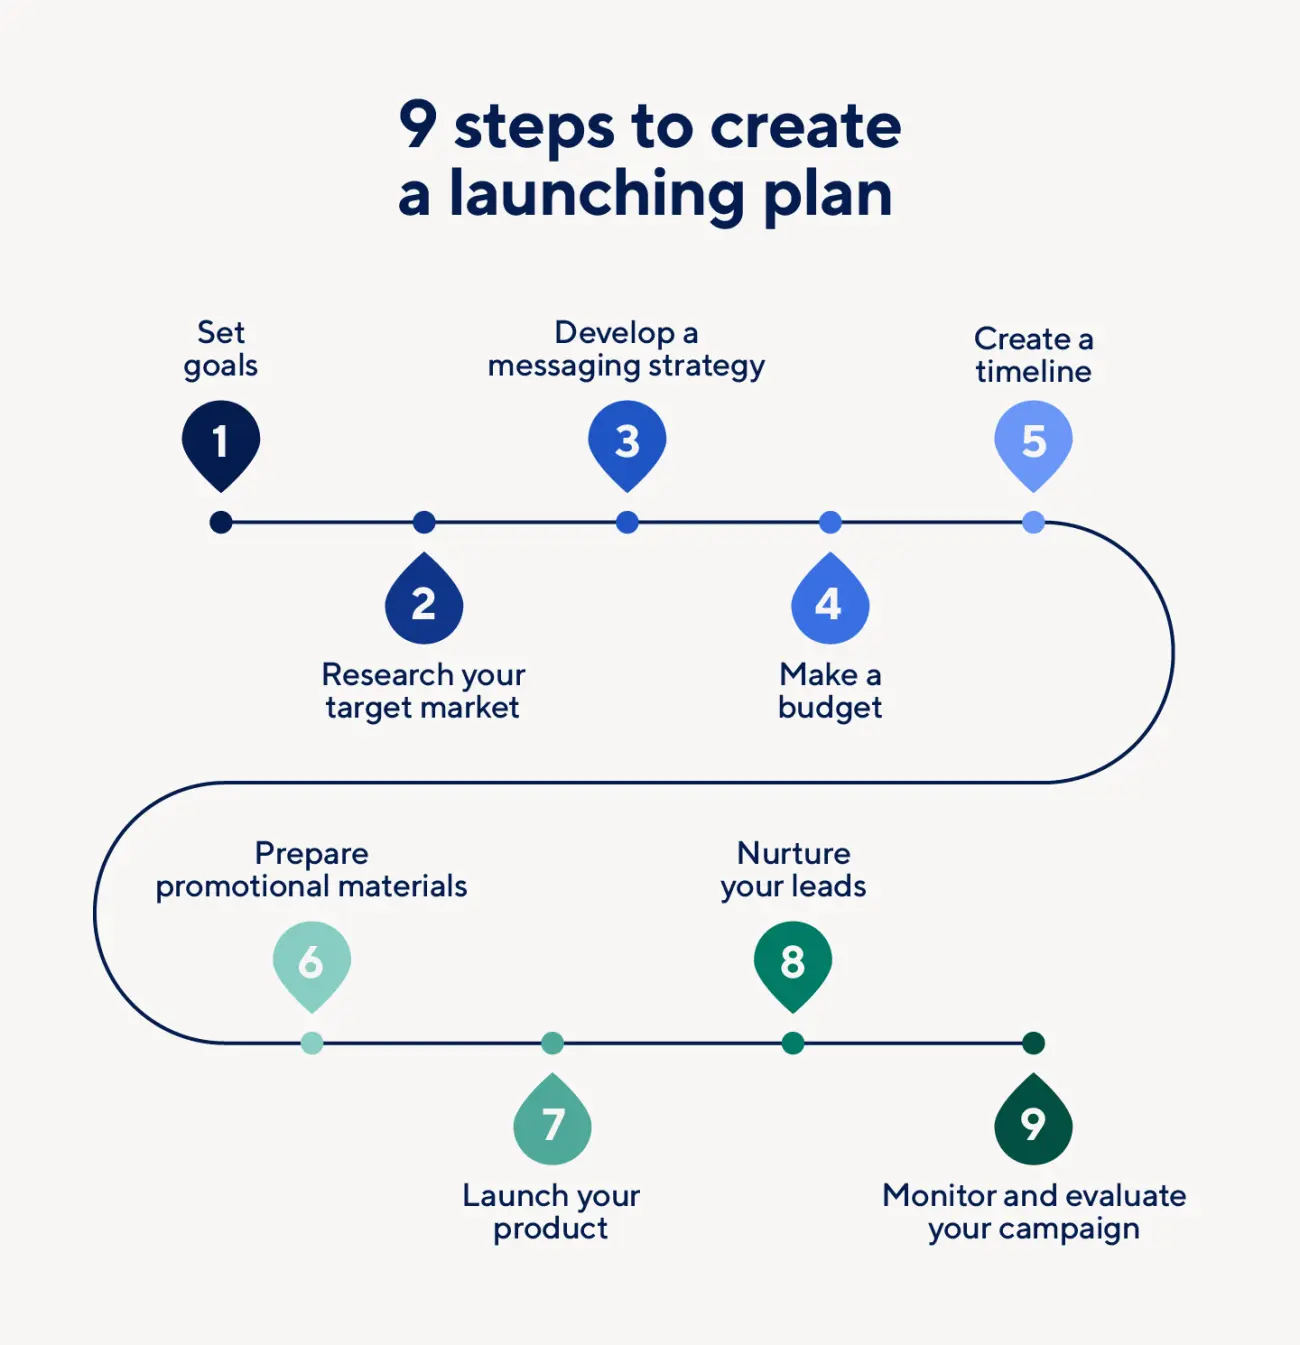 Receive key insights before launching a new product